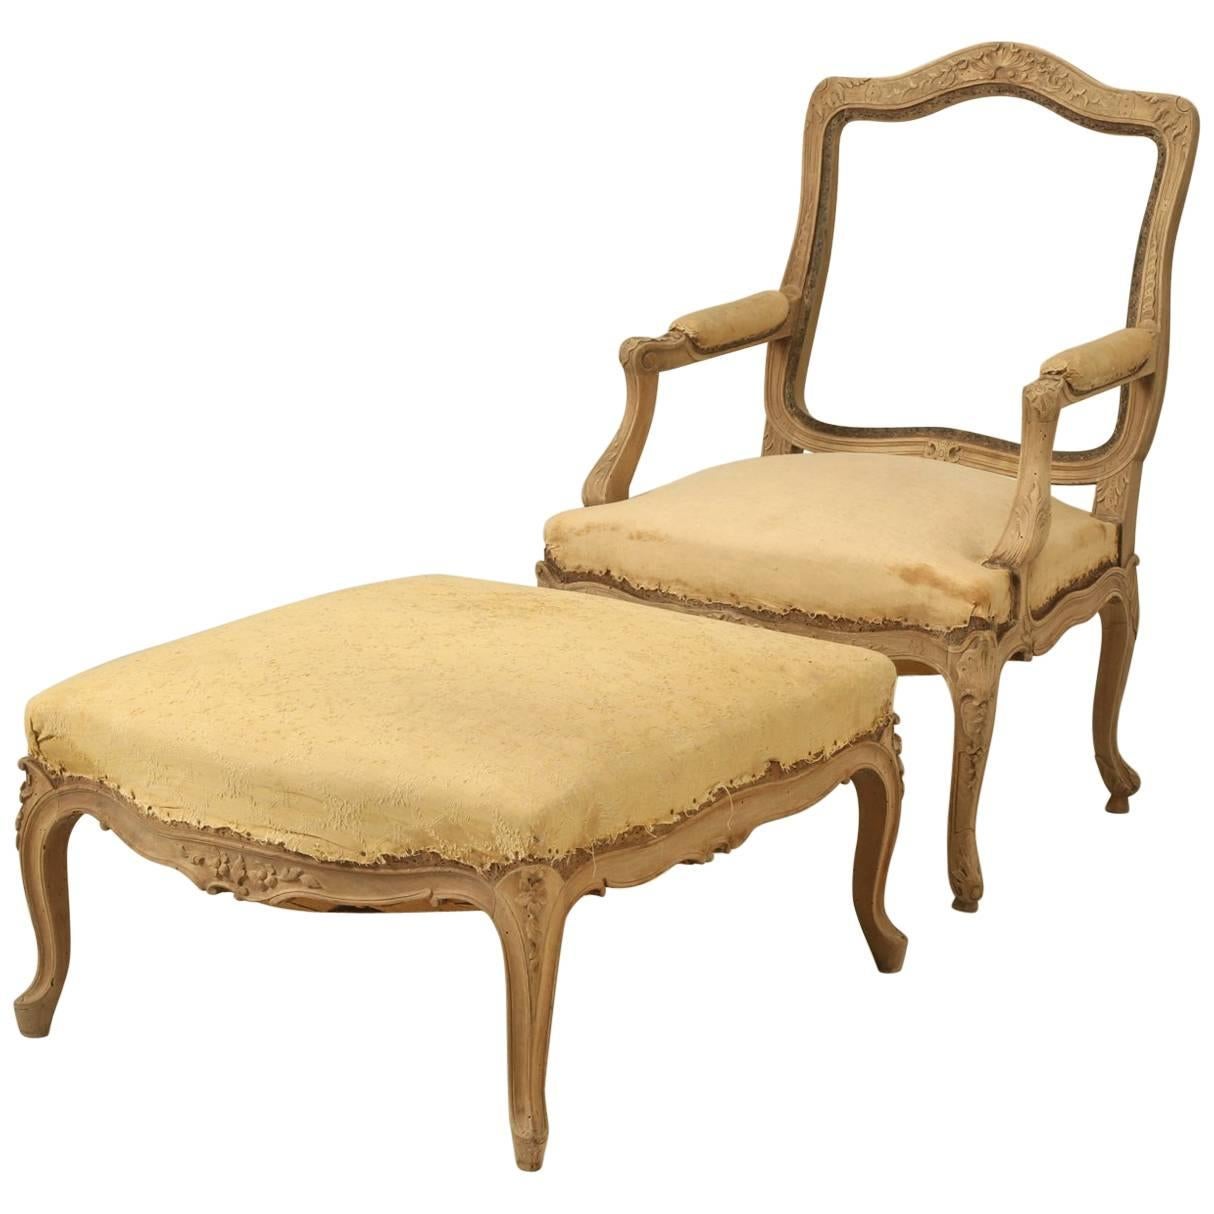 French Antique Duchesse Brisée or Lounge Chair and Ottoman Original Unrestored